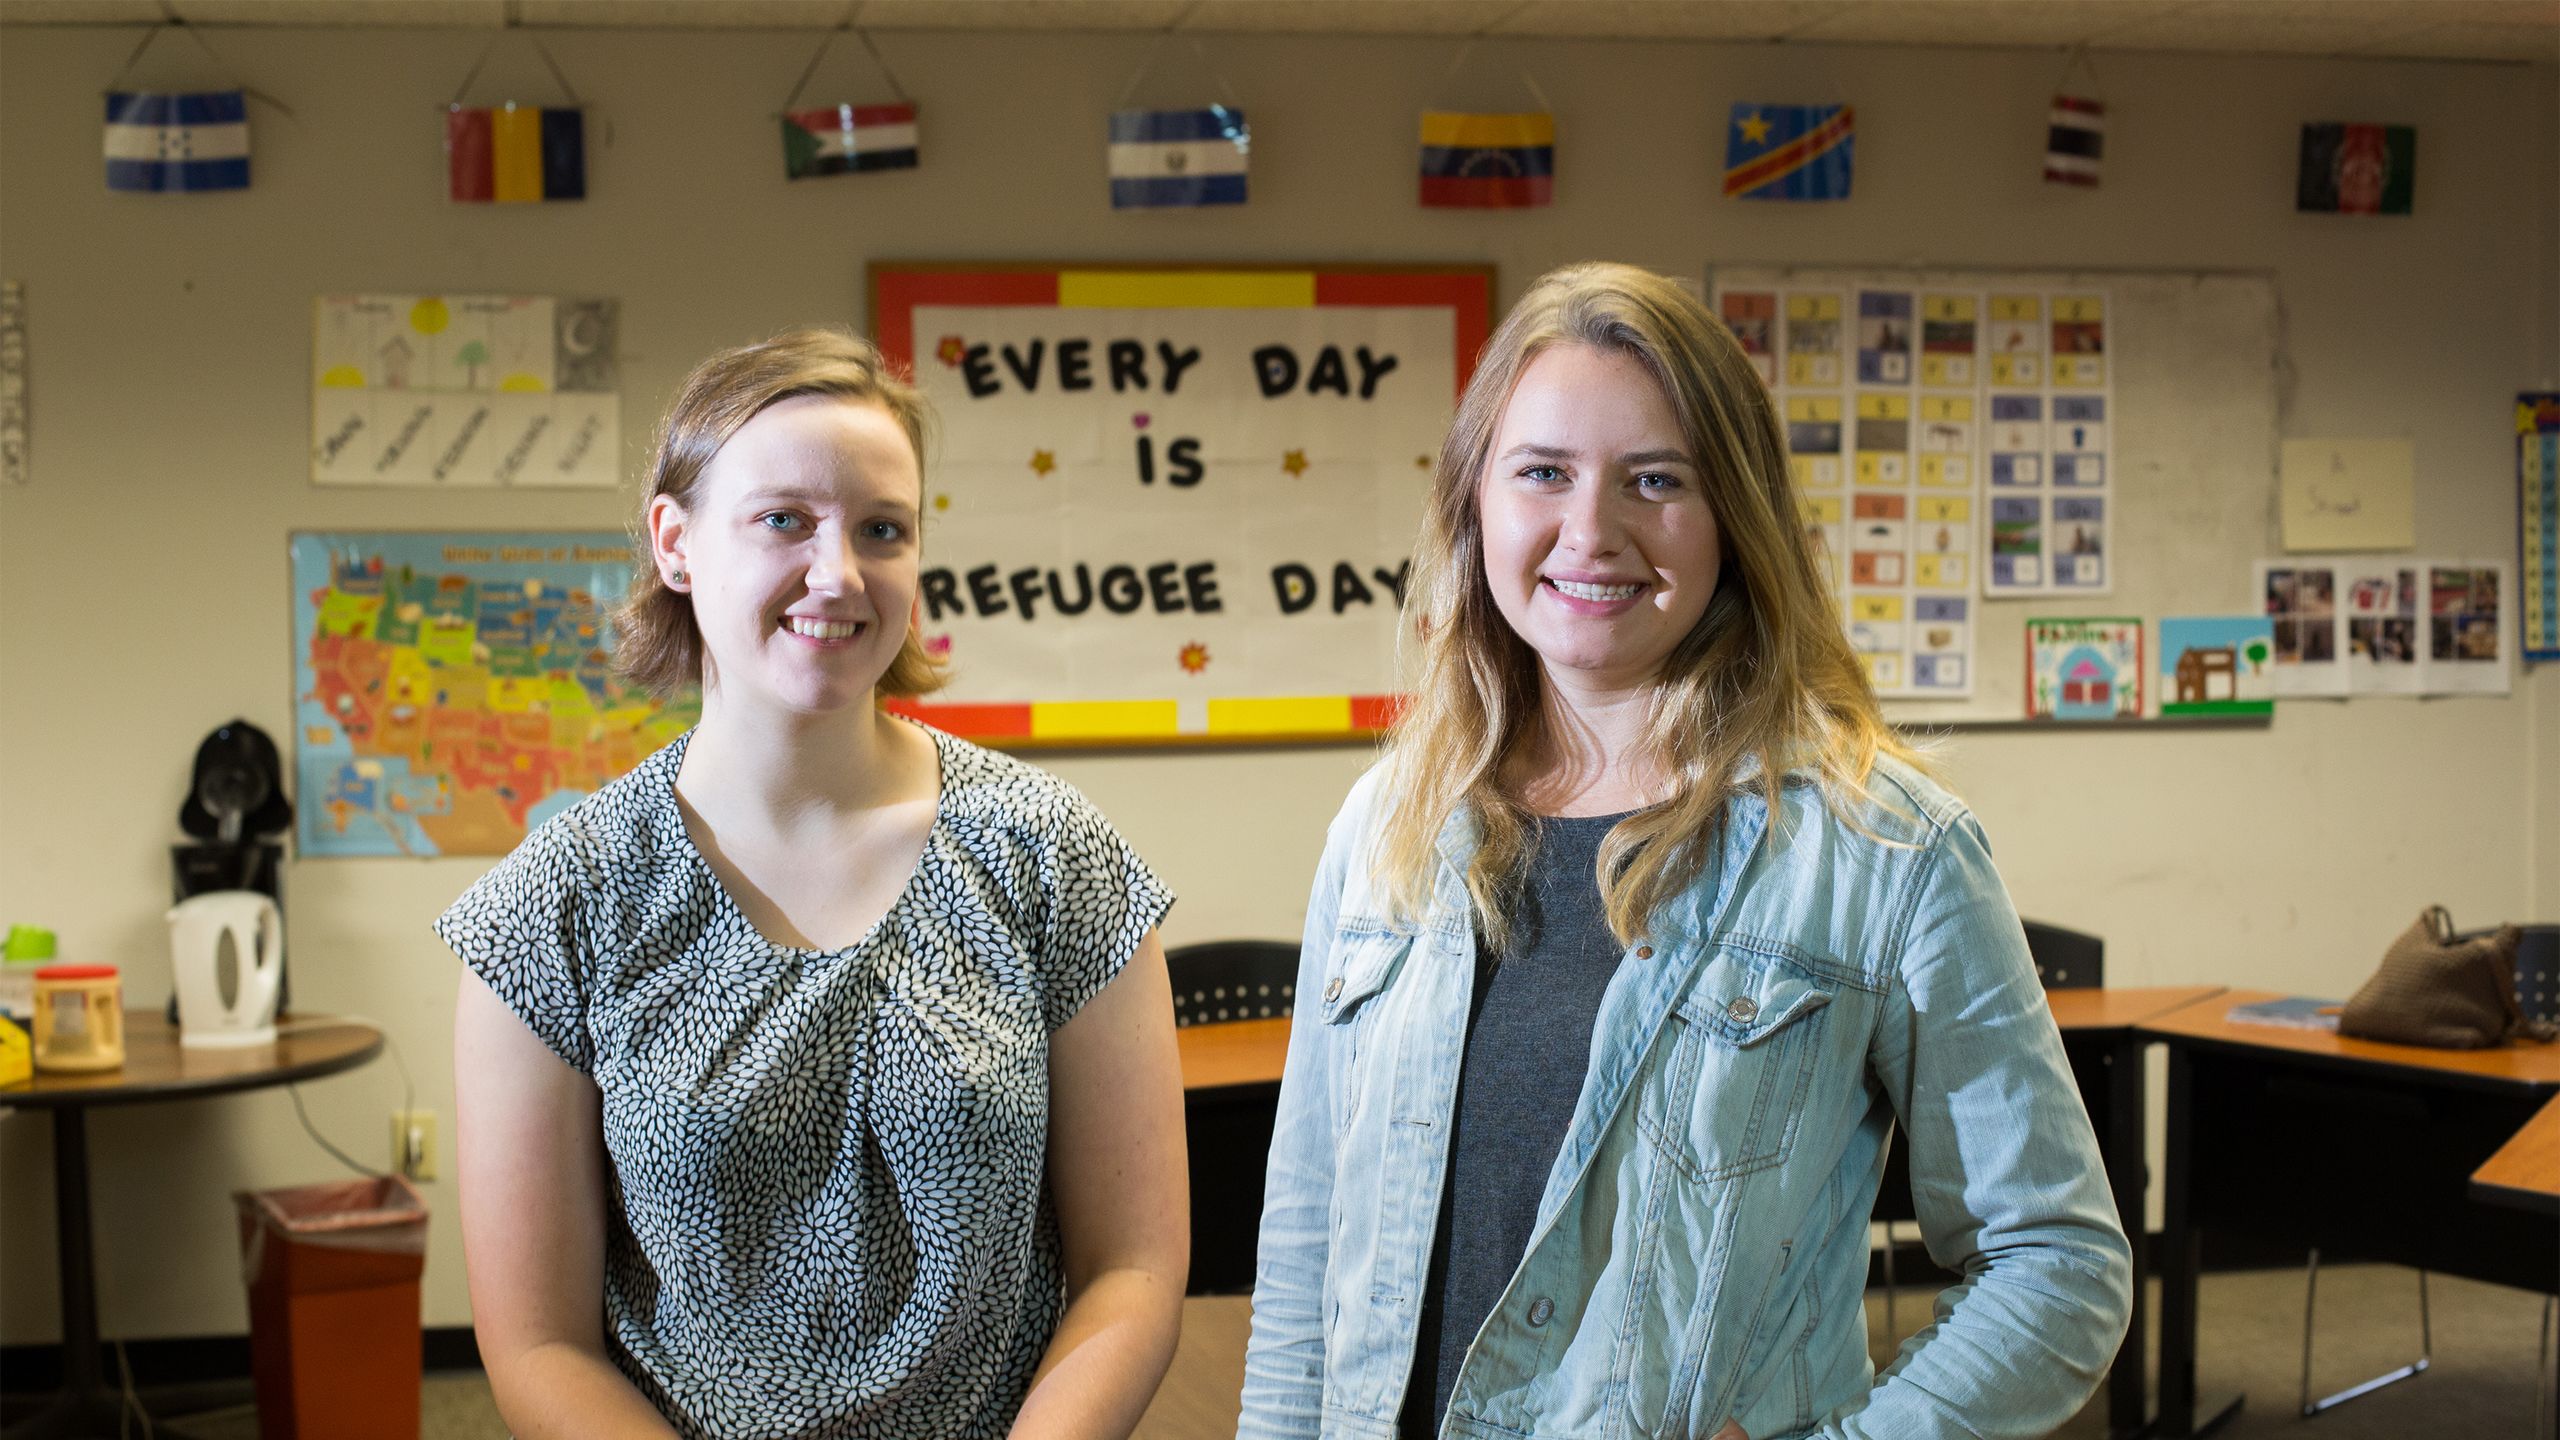 Lydia Bailey and M.K. Healy stand in a classroom with a bulletin board that reads "Every Day is Refugee Day."